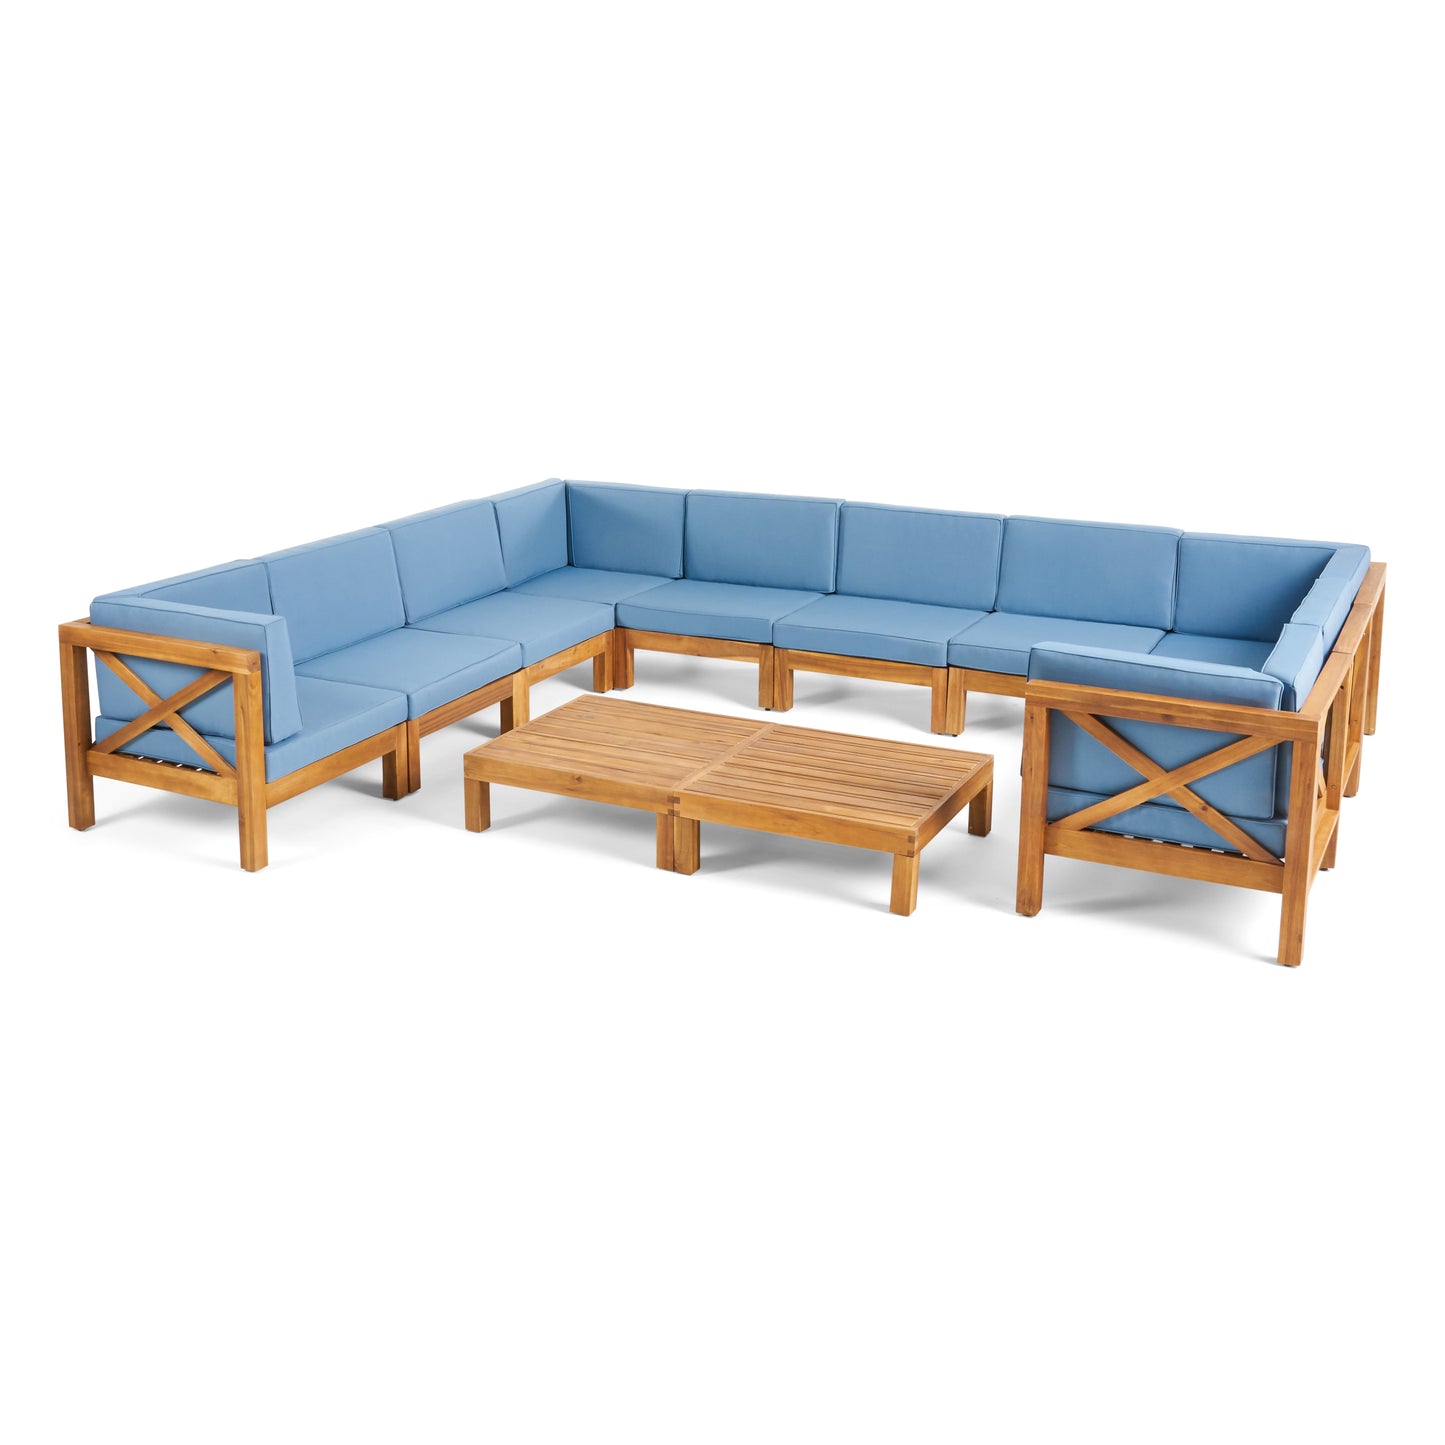 Cynthia Outdoor Acacia Wood 12-Piece U-Shaped Sectional Sofa Set with Two Coffee Tables